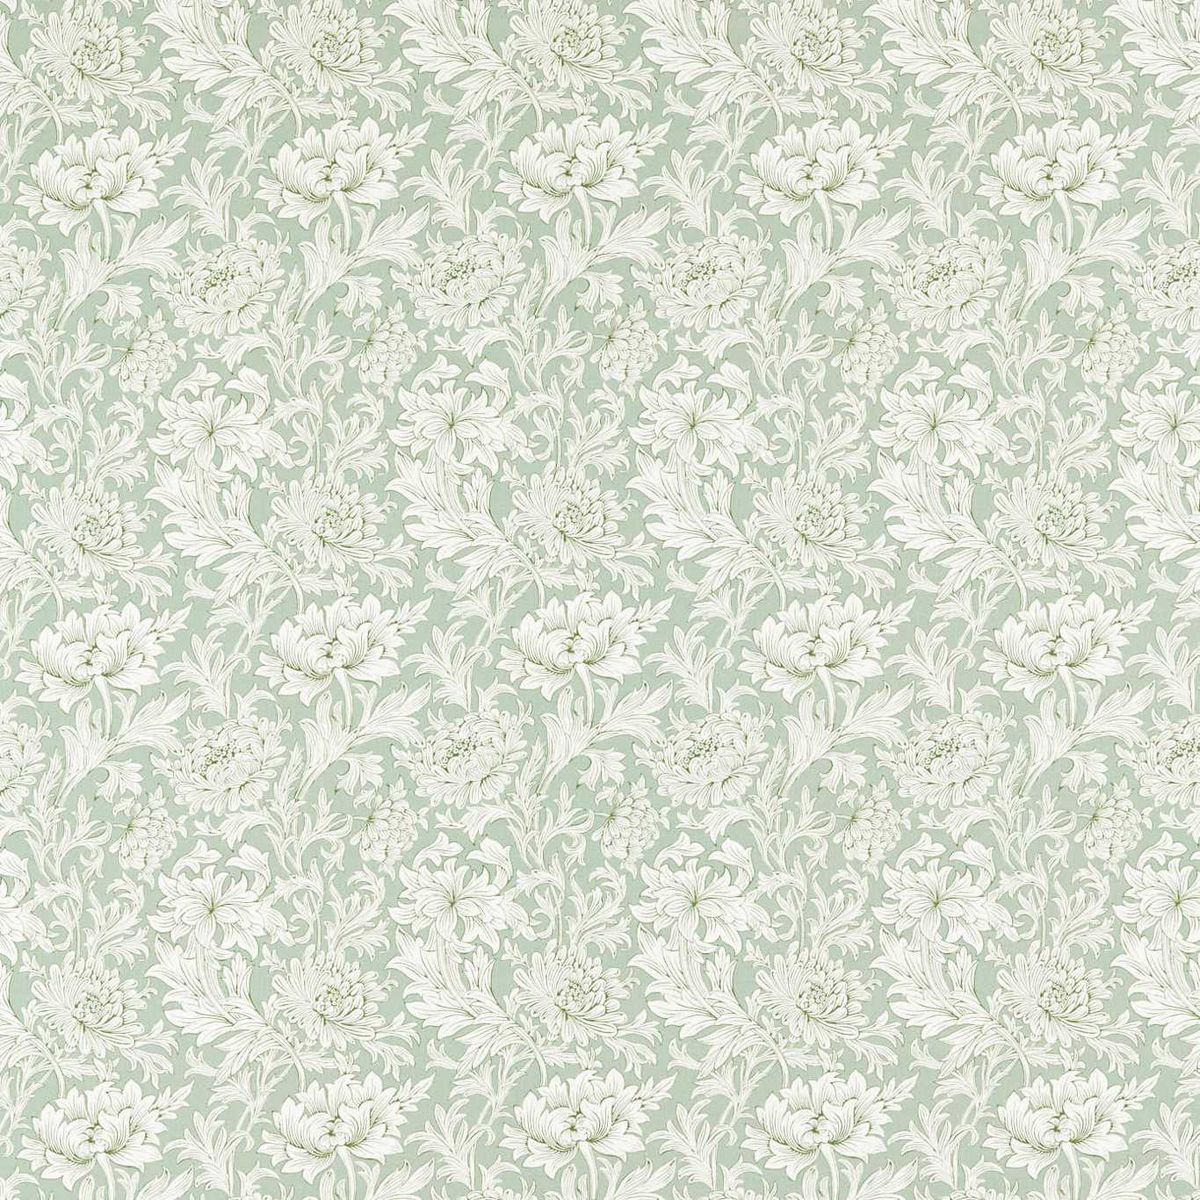 Chrysanthemum Toile Willow Fabric by William Morris & Co.